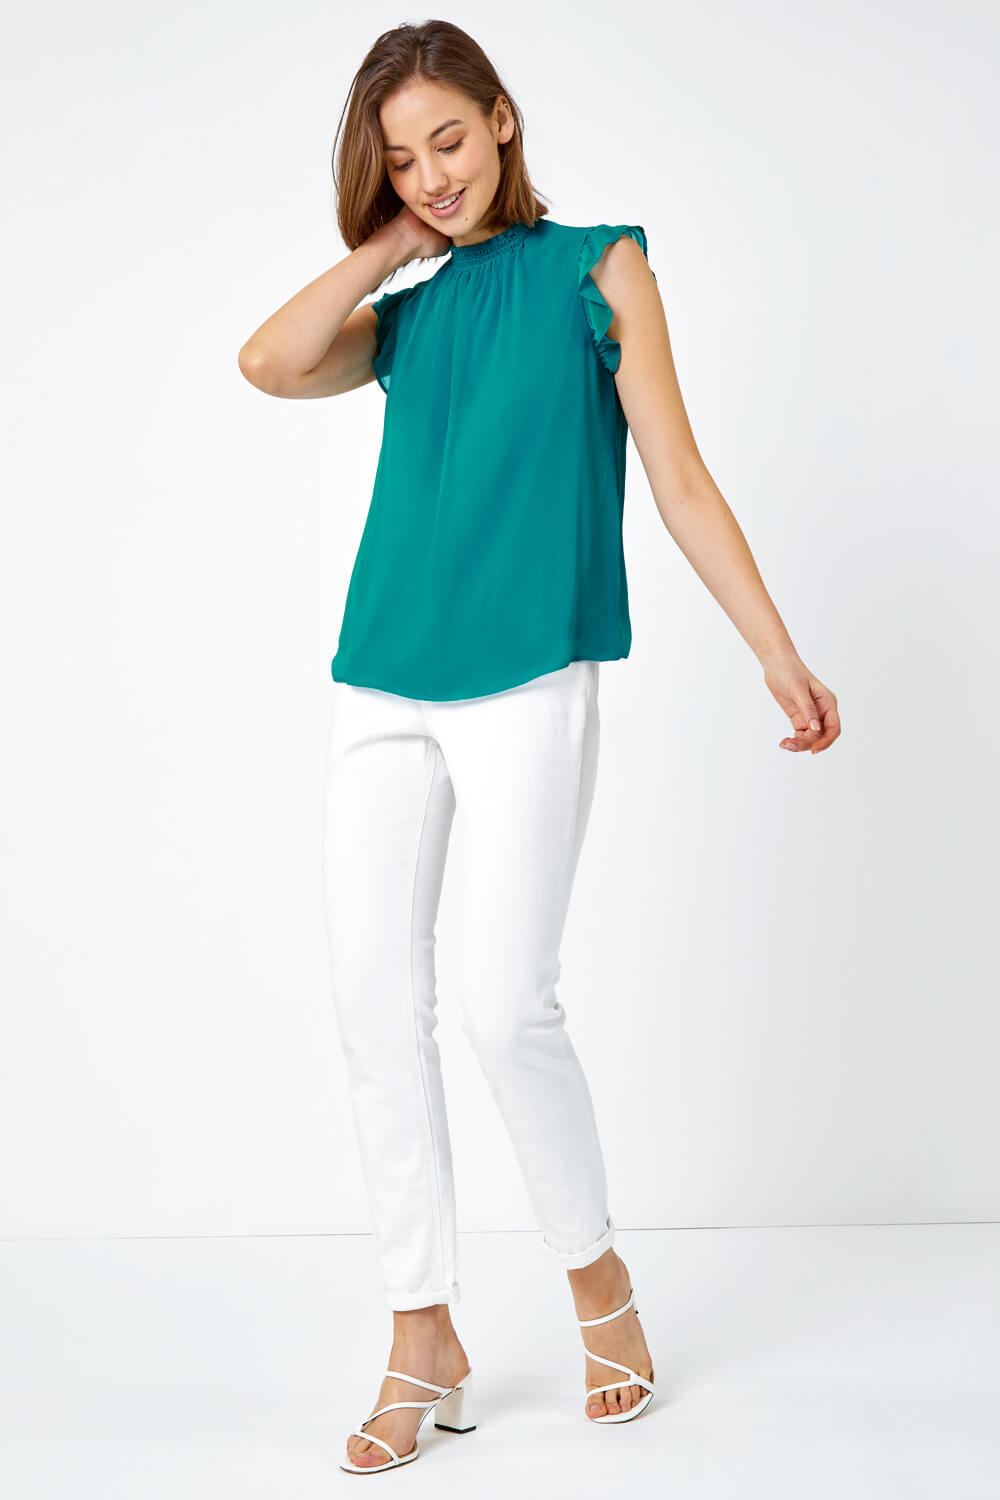 Teal Sleeveless High Neck Frill Top, Image 4 of 5